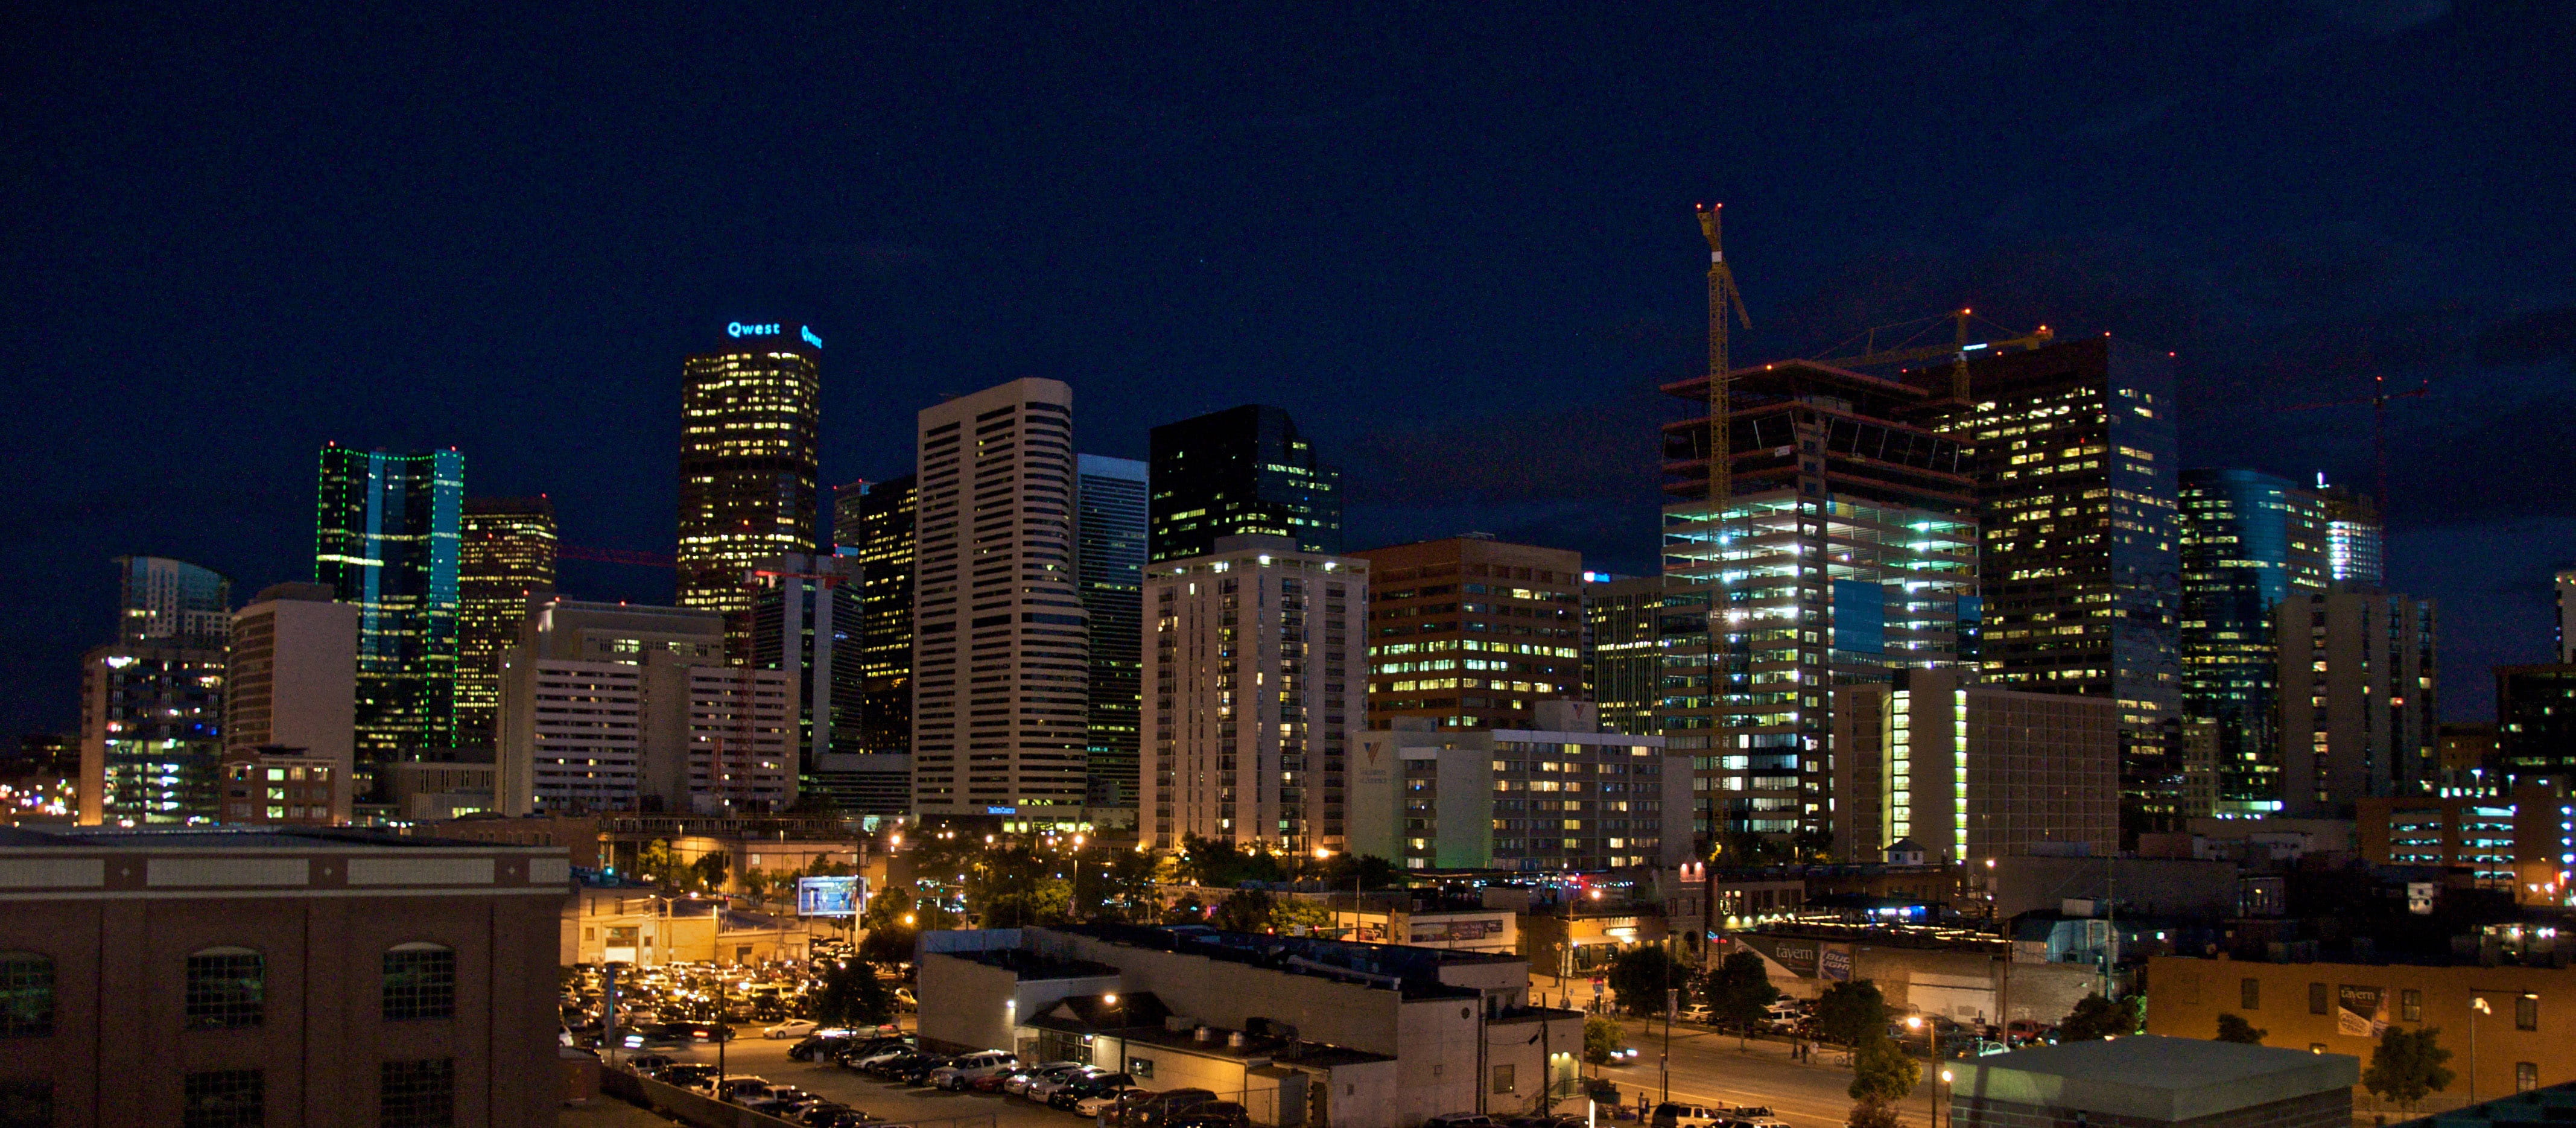 Night Time Cityscape and lights in Denver, Colorado, building